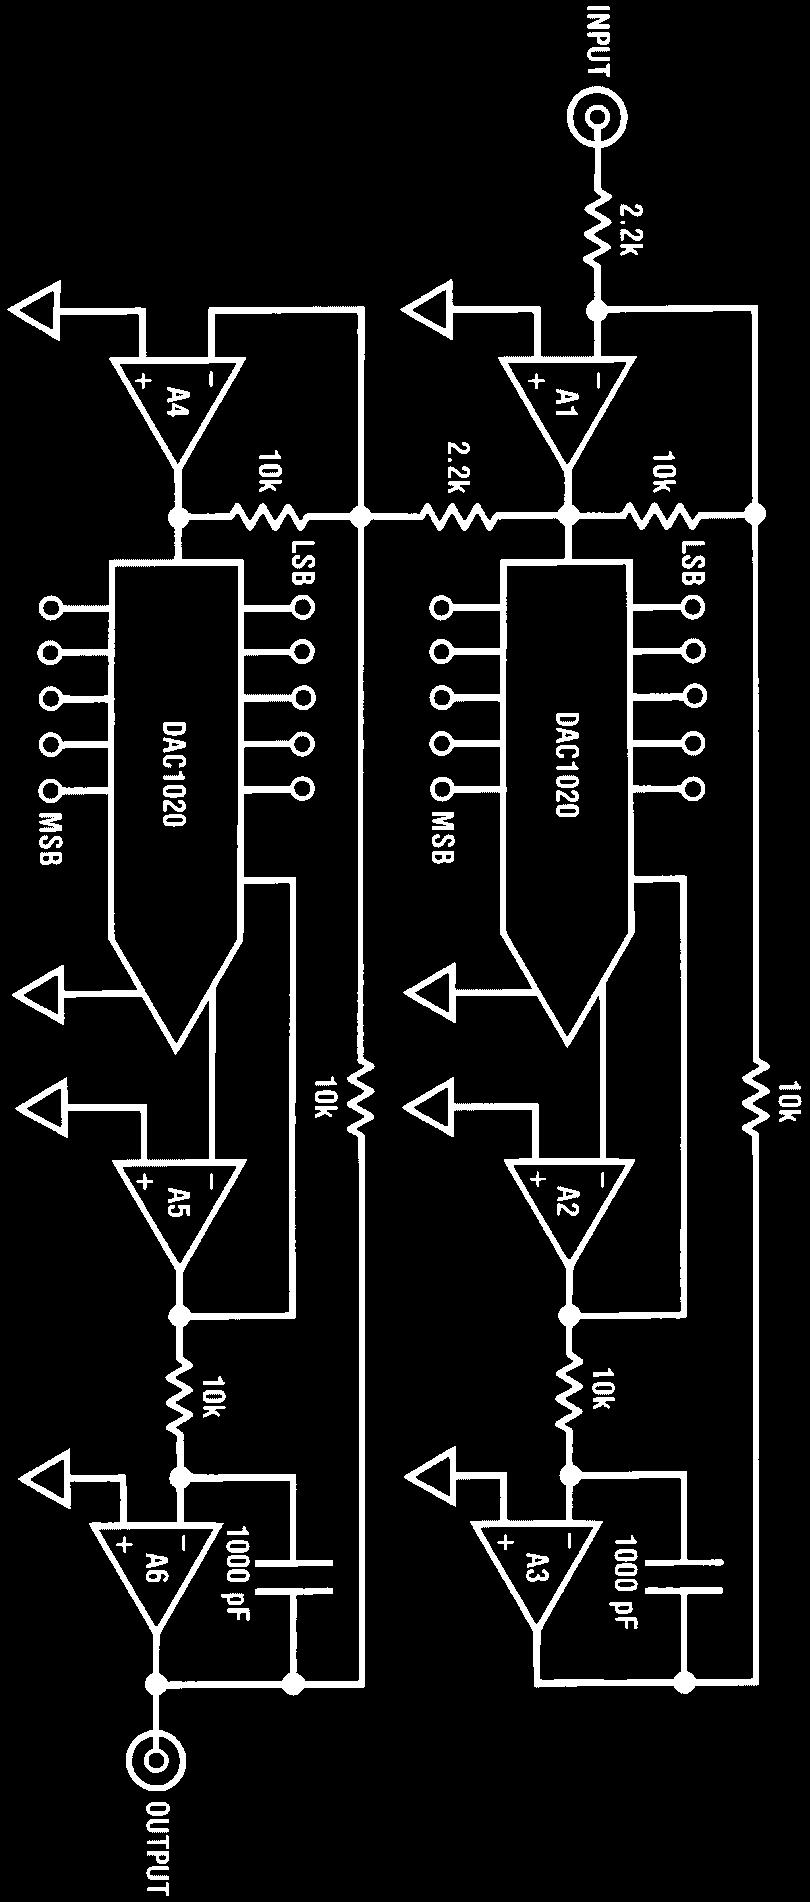 digitally programmable first order bandpass filter The multiplying DAC s function is to control cut-off frequency by controlling the gain of the A3 A6 integrators which has the effect of varying the